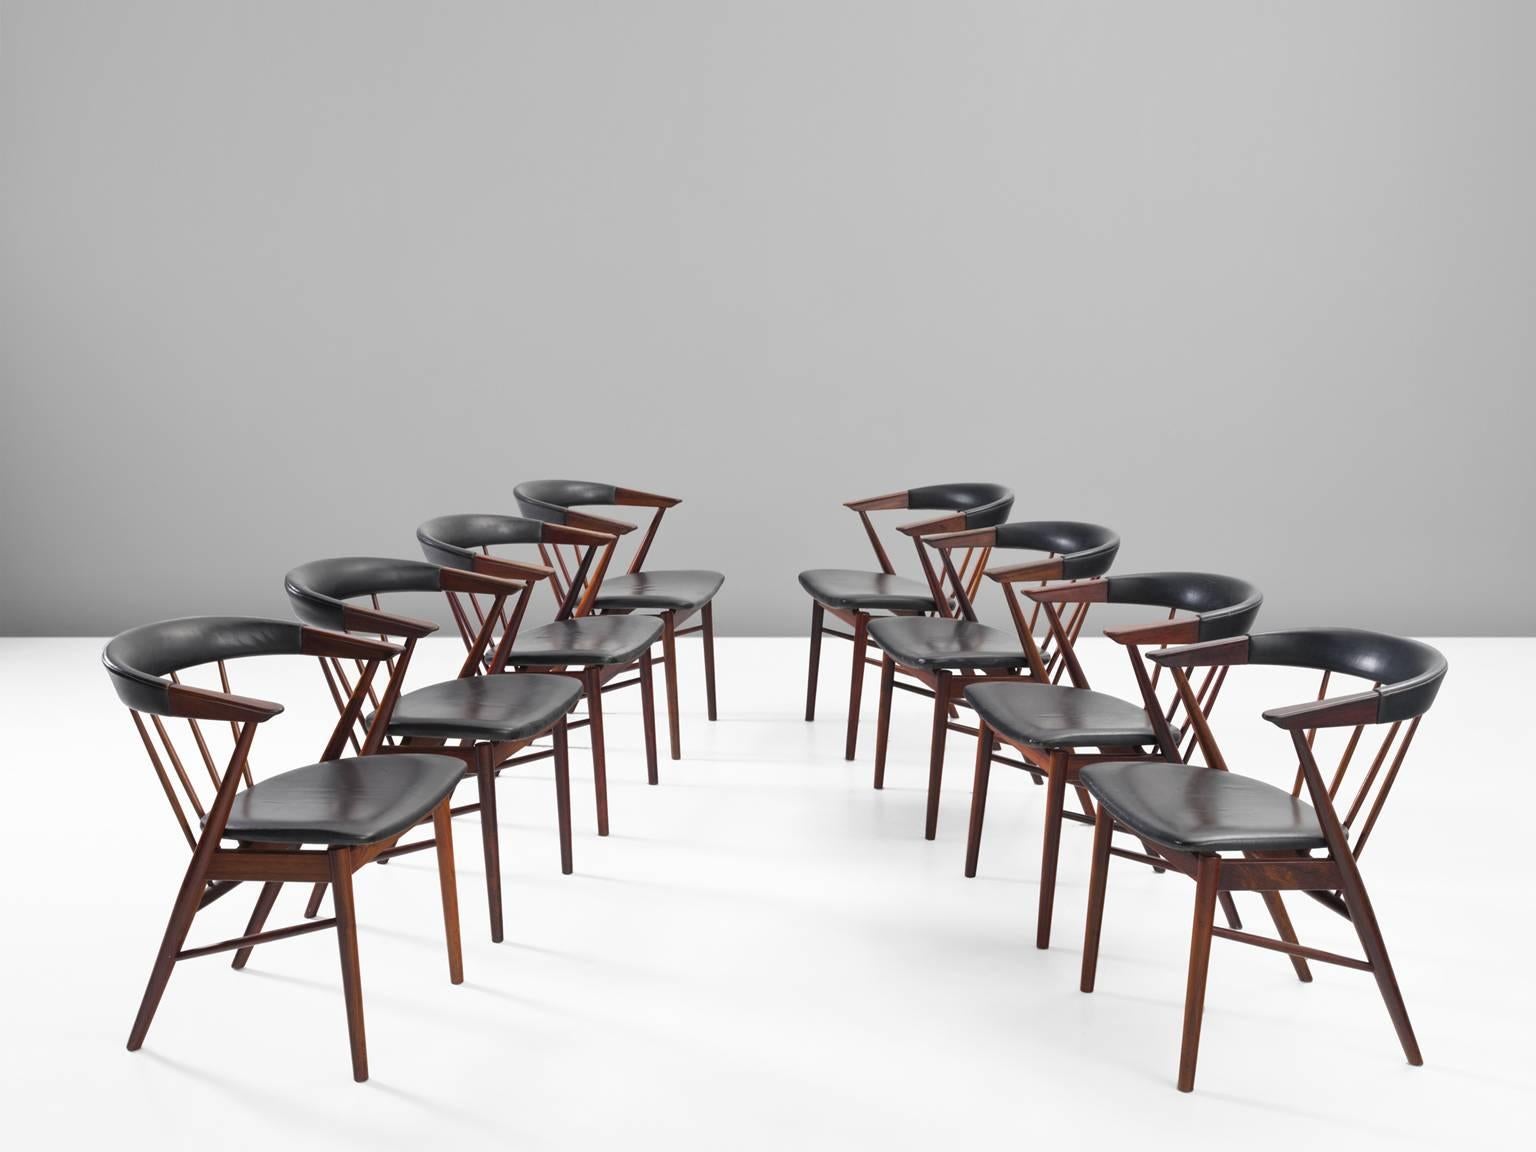 Chairs, rosewood and leather, Denmark, 1950s.

These chairs by Helge Sibast (1908-1985) for Sibast Furniture exhibit a distinct cantilevered seat with a bent backrest. The back is supported with a series tapered spindles. The back legs taper into